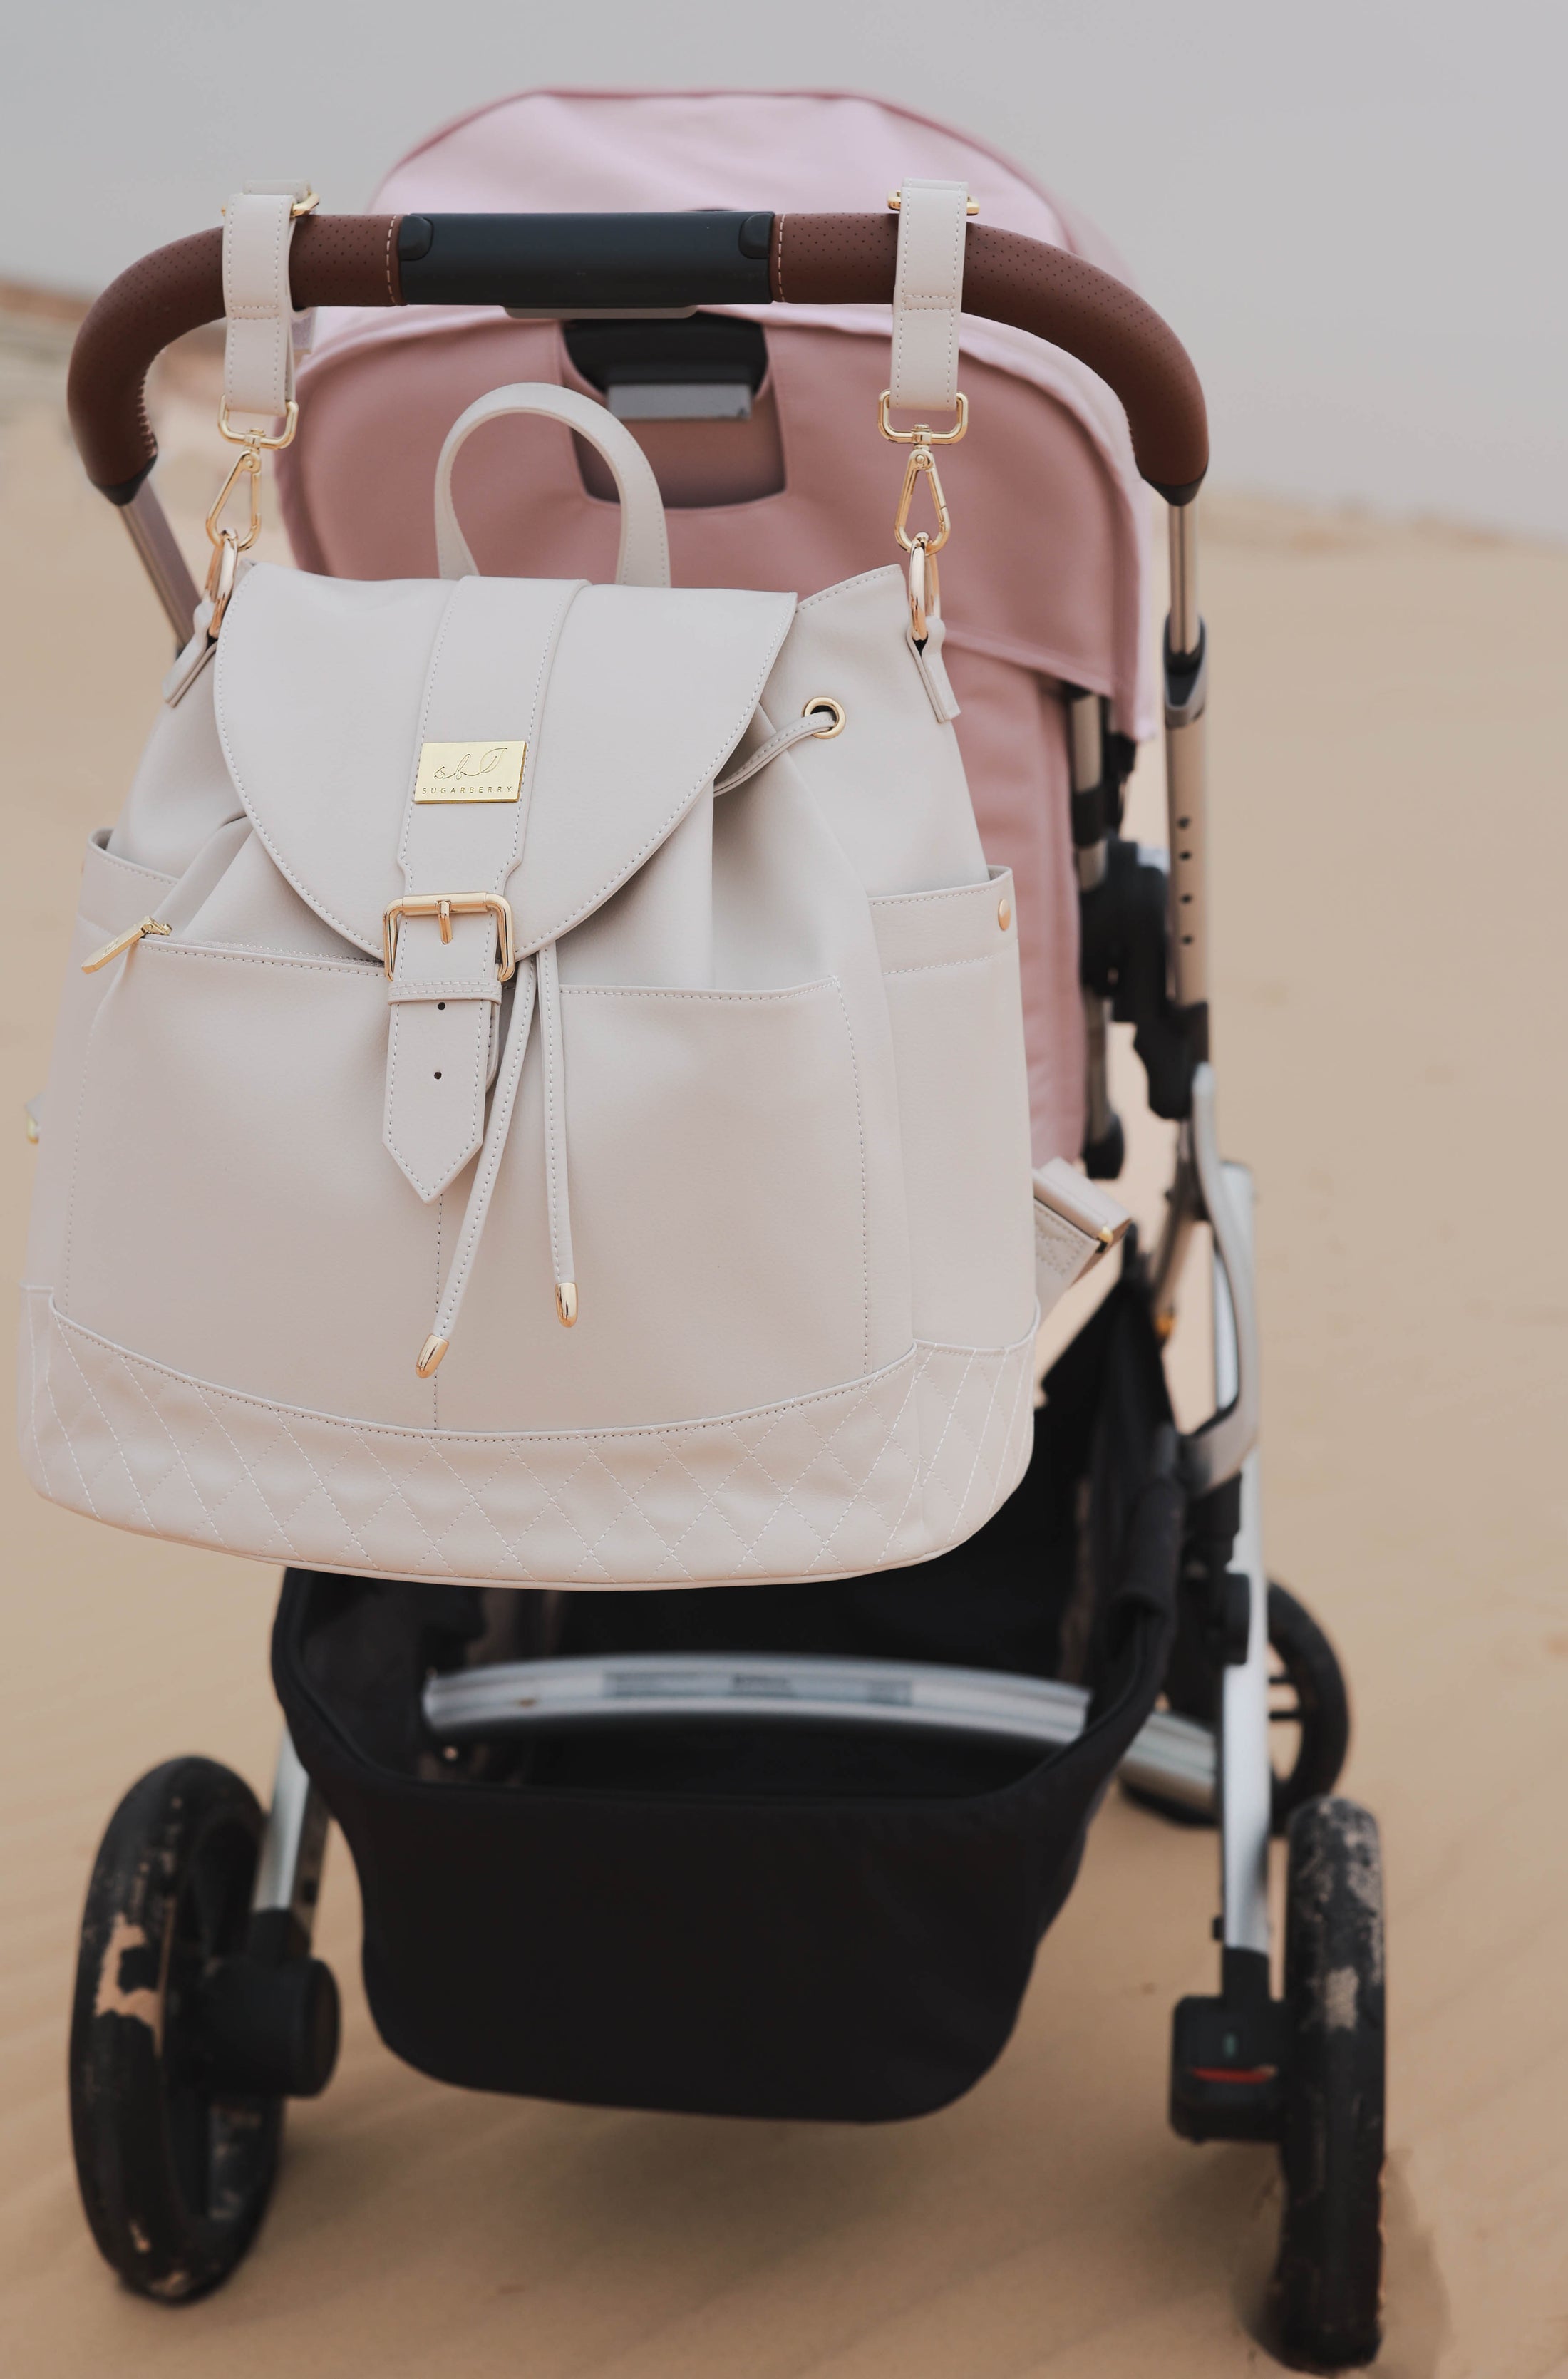 The Unbothered Diaper Bag